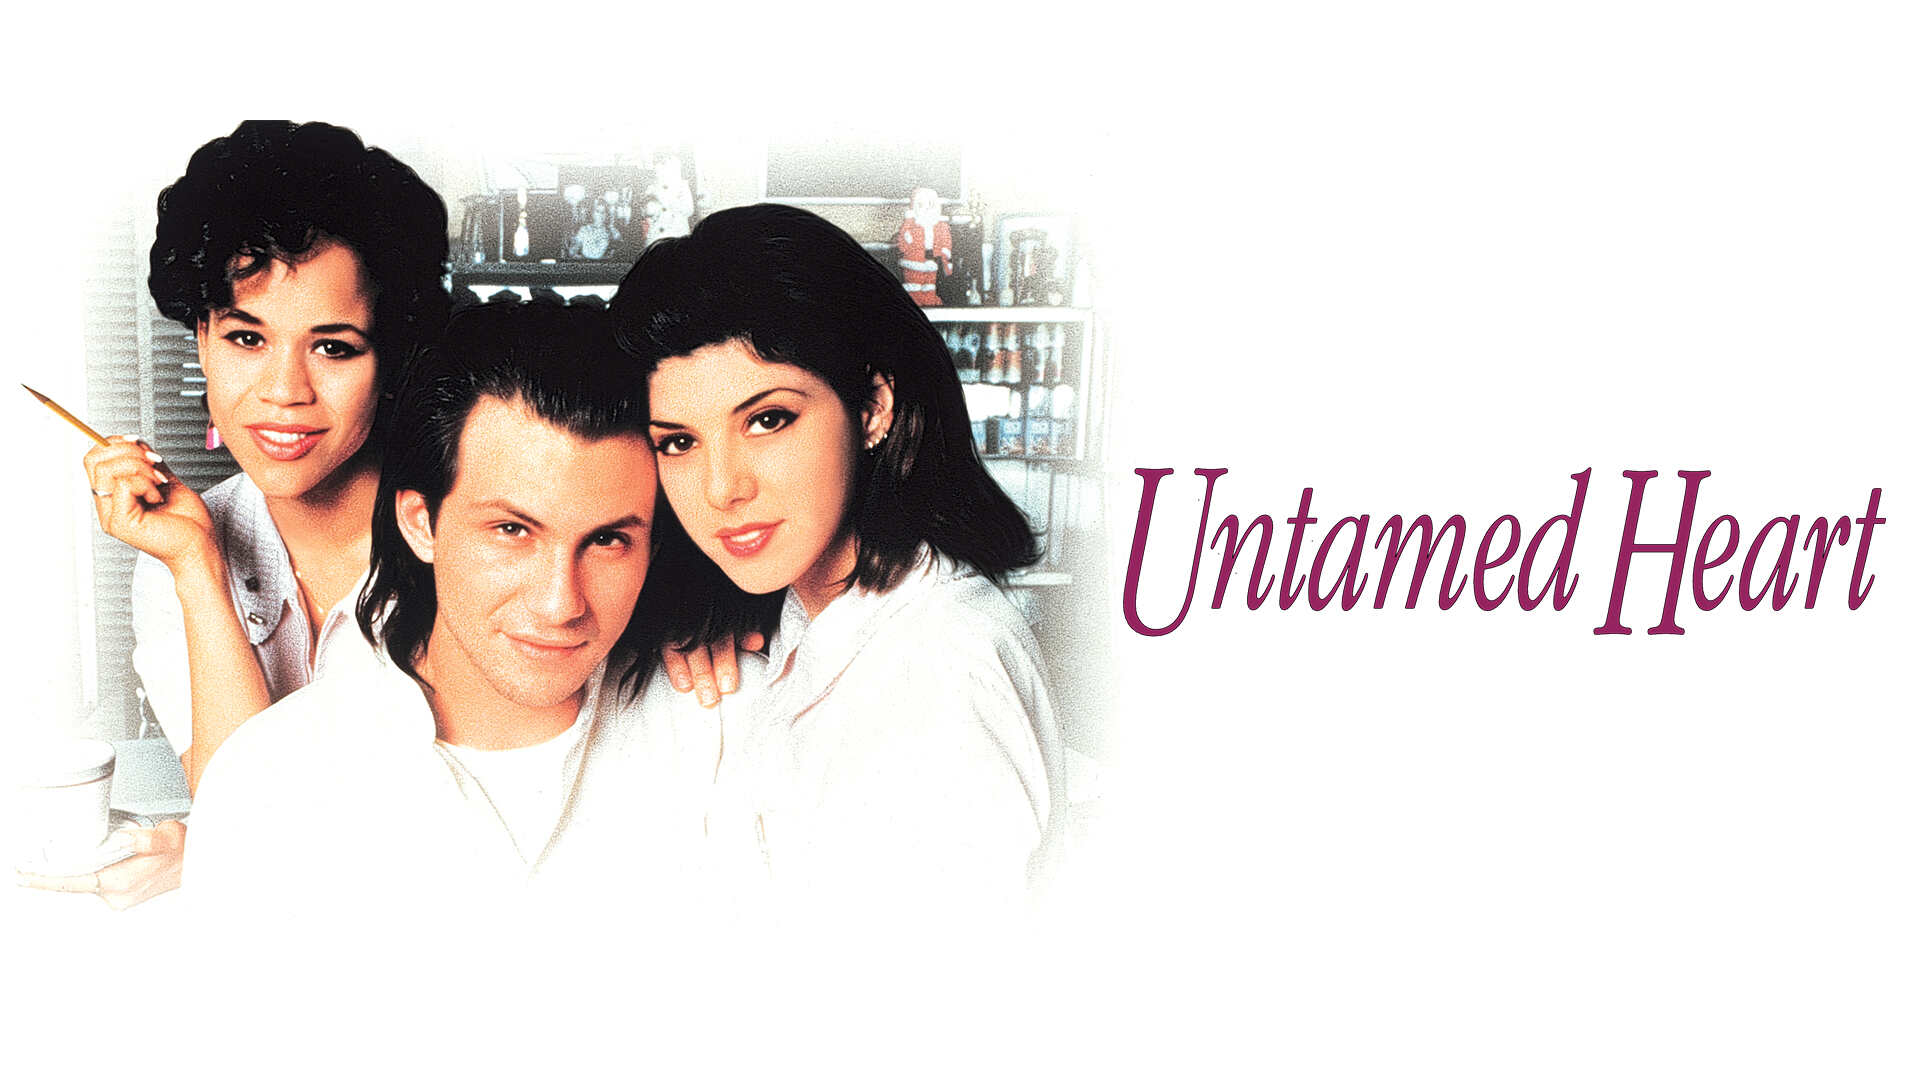 42-facts-about-the-movie-untamed-heart